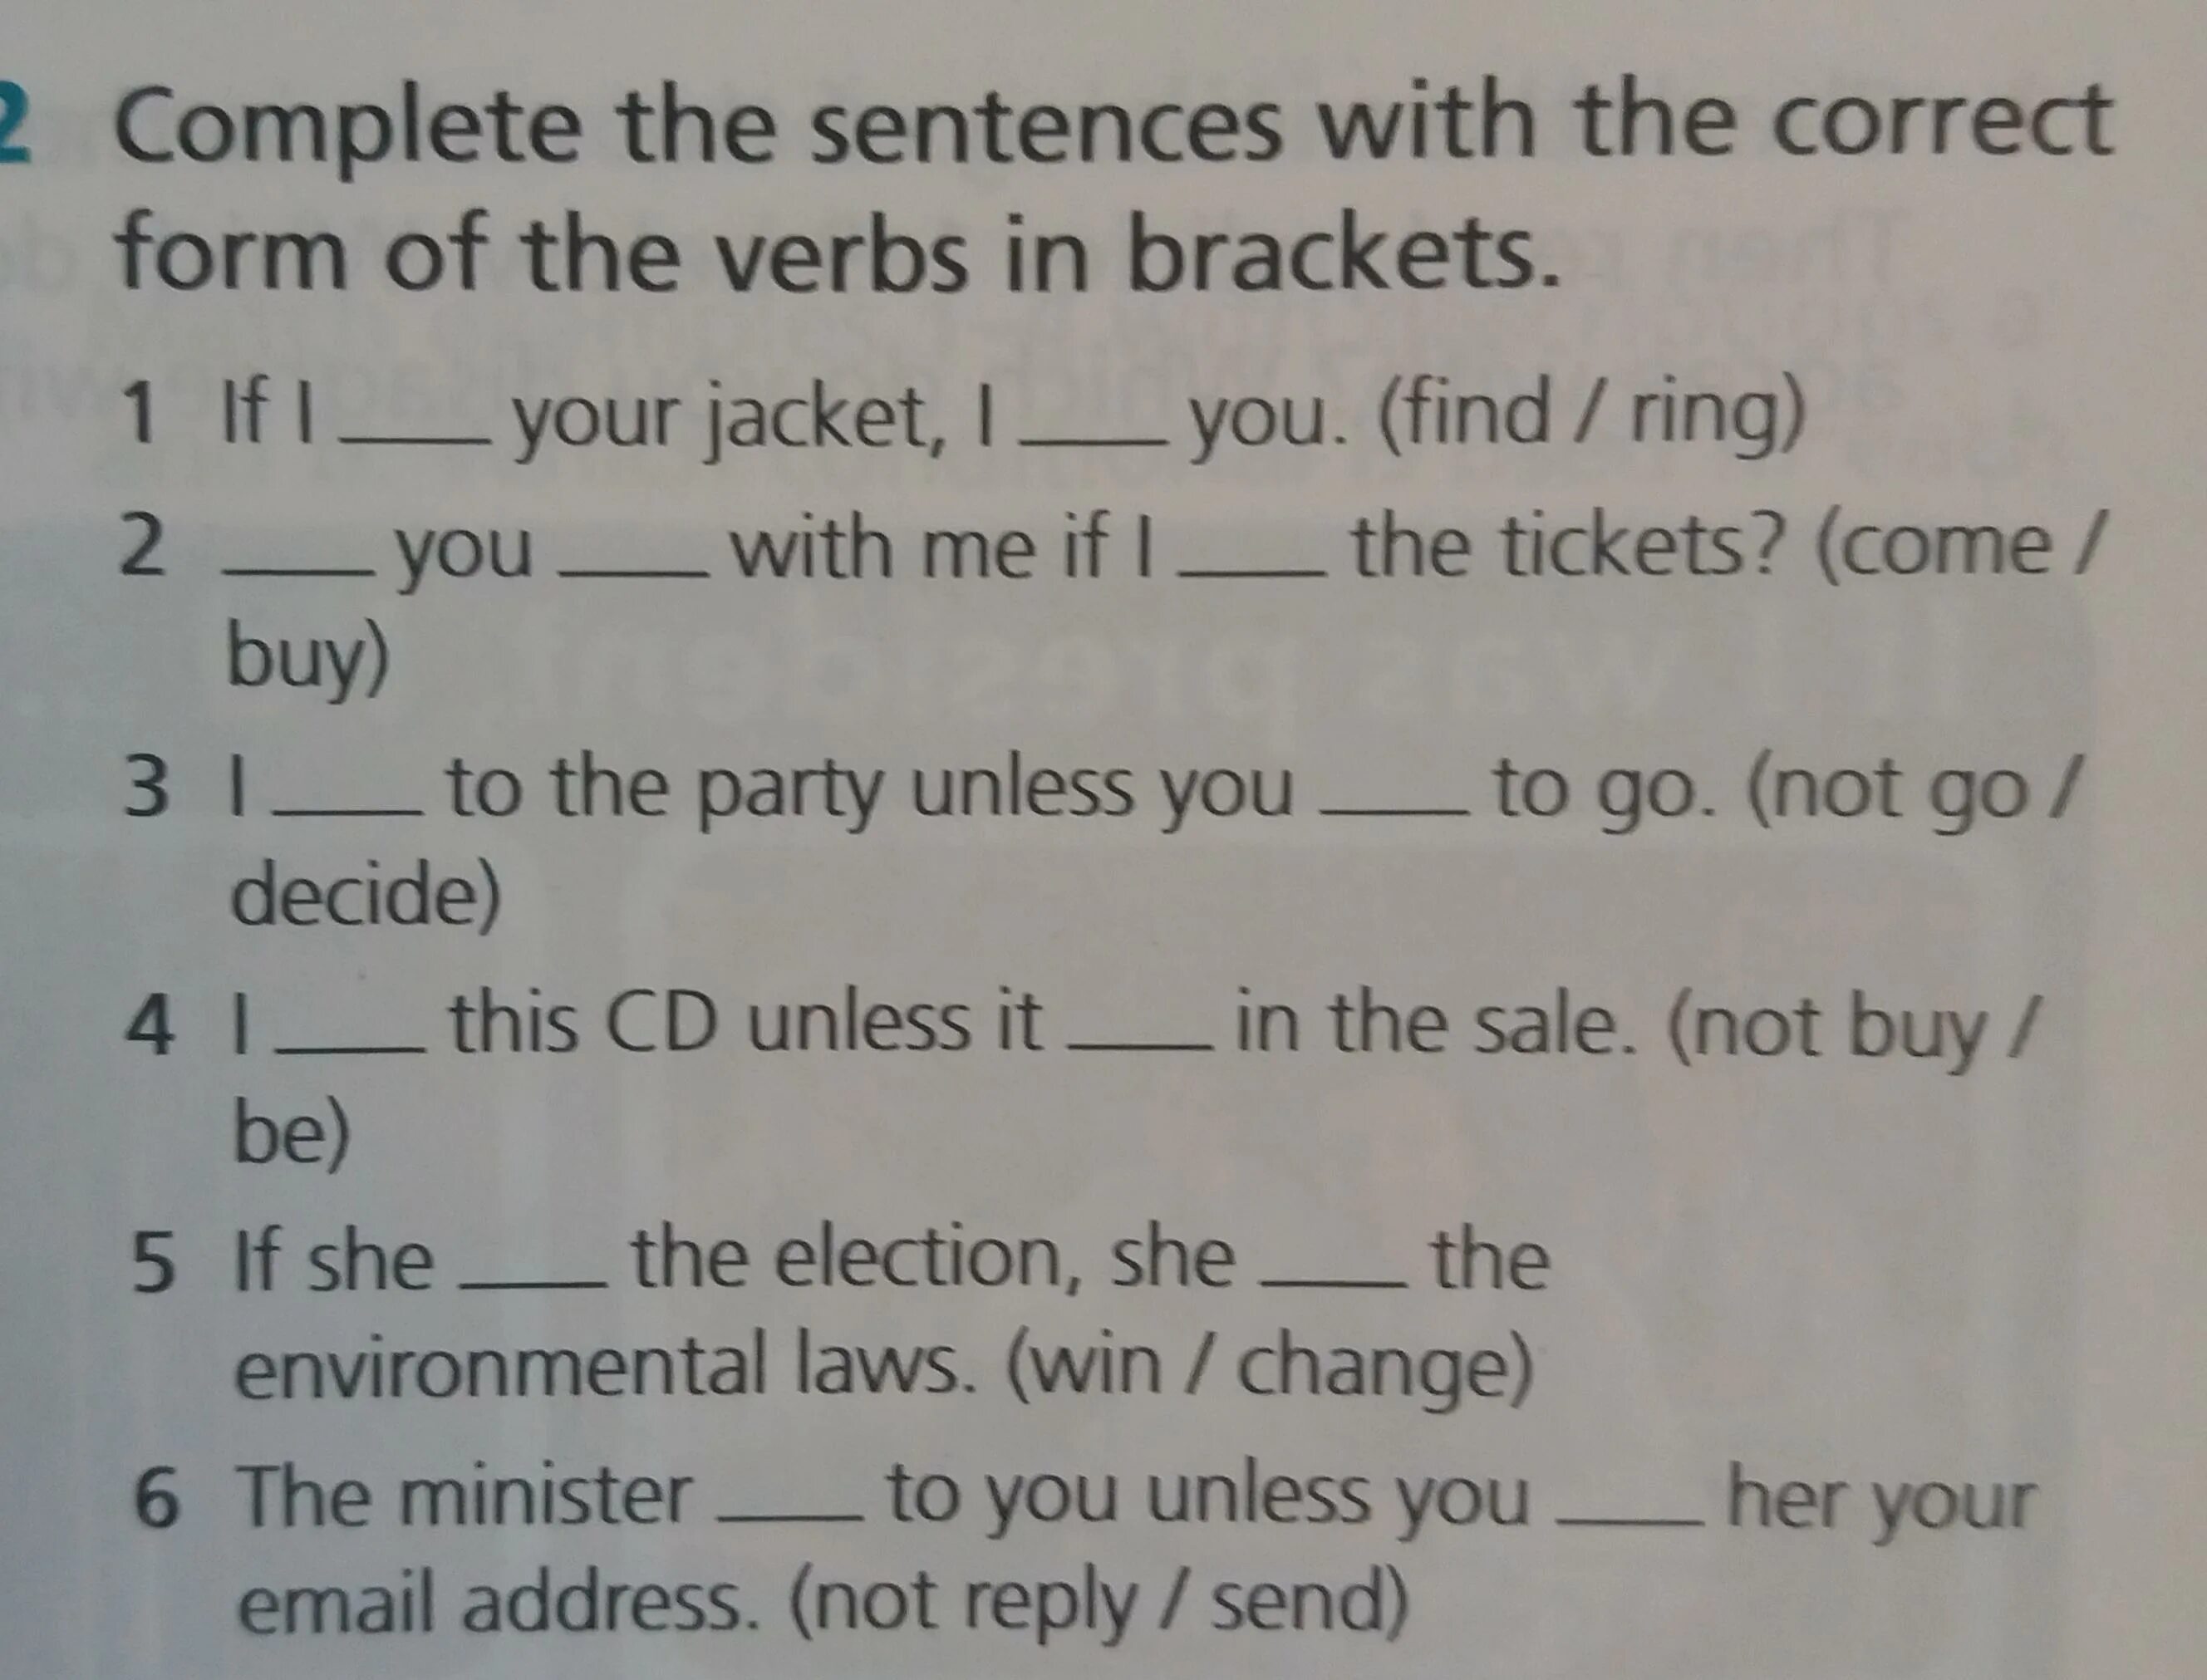 Complete the sentences with correct forms. Complete the sentences with the correct form of the verbs in Brackets. Complete the sentences with the correct form of the verbs. Complete the sentences with the correct form of the verbs in Brackets перевод. Complete the sentences with the correct verbal form.